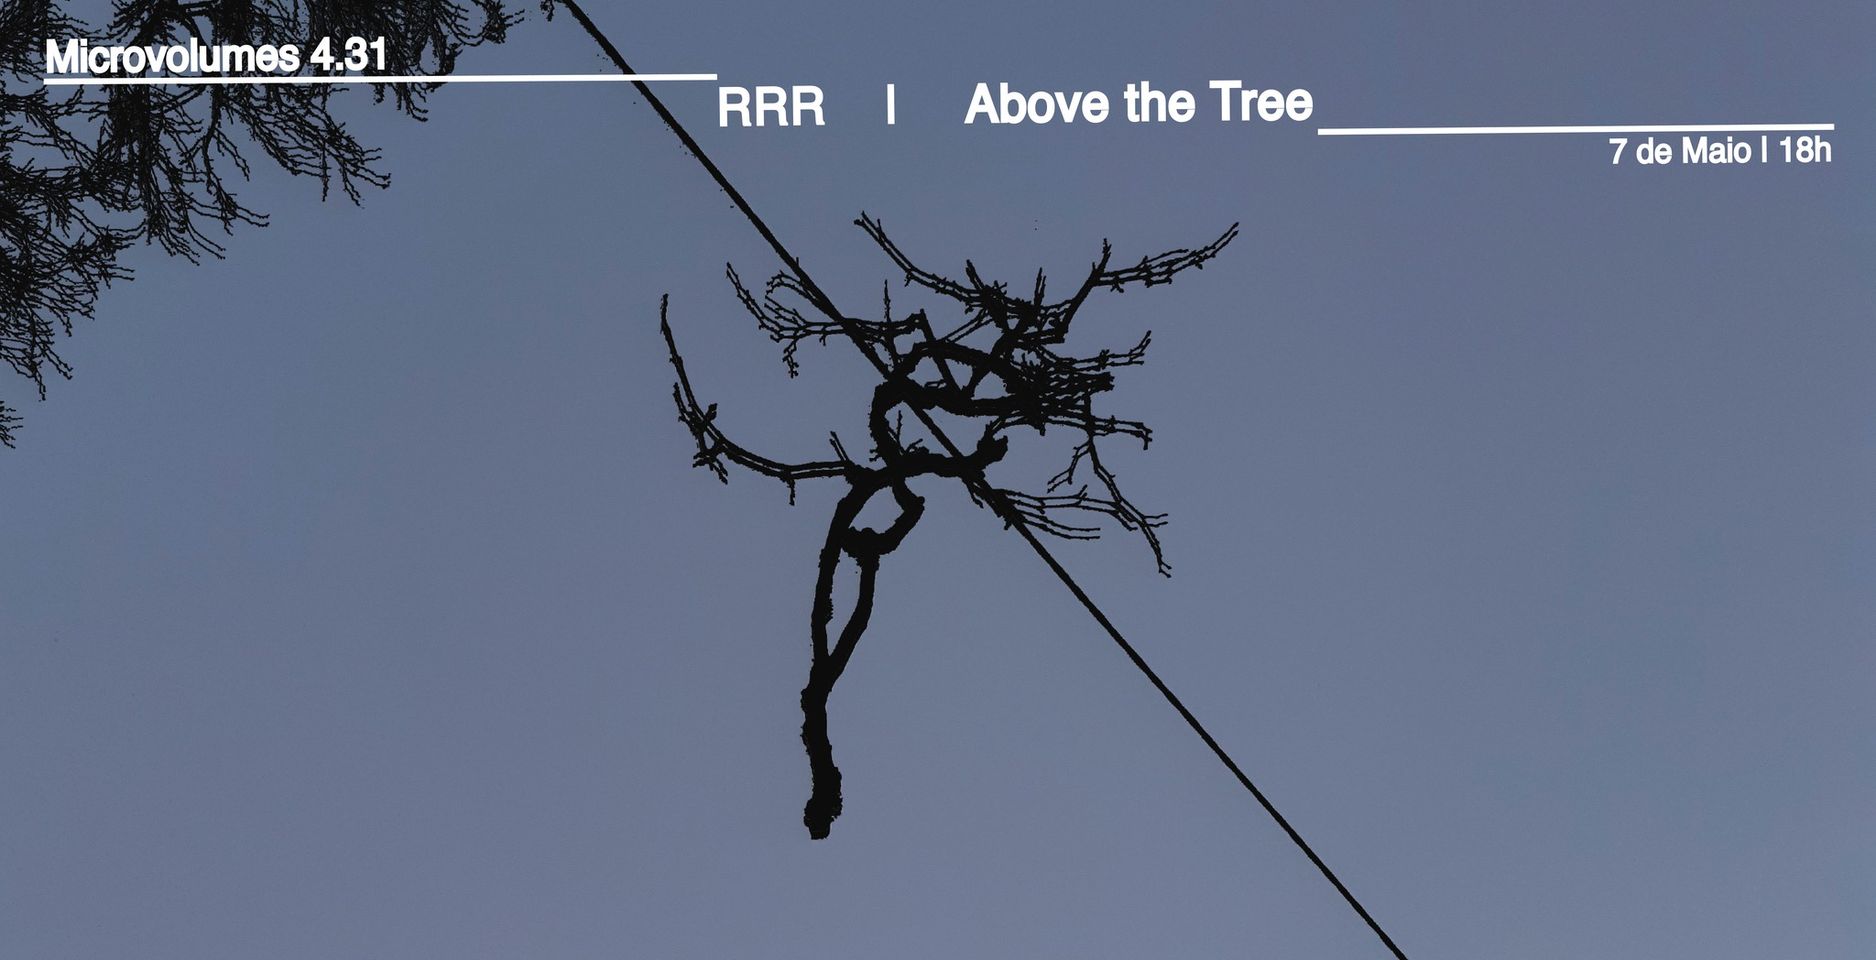 Microvolumes 4.31 RRR Above the Tree